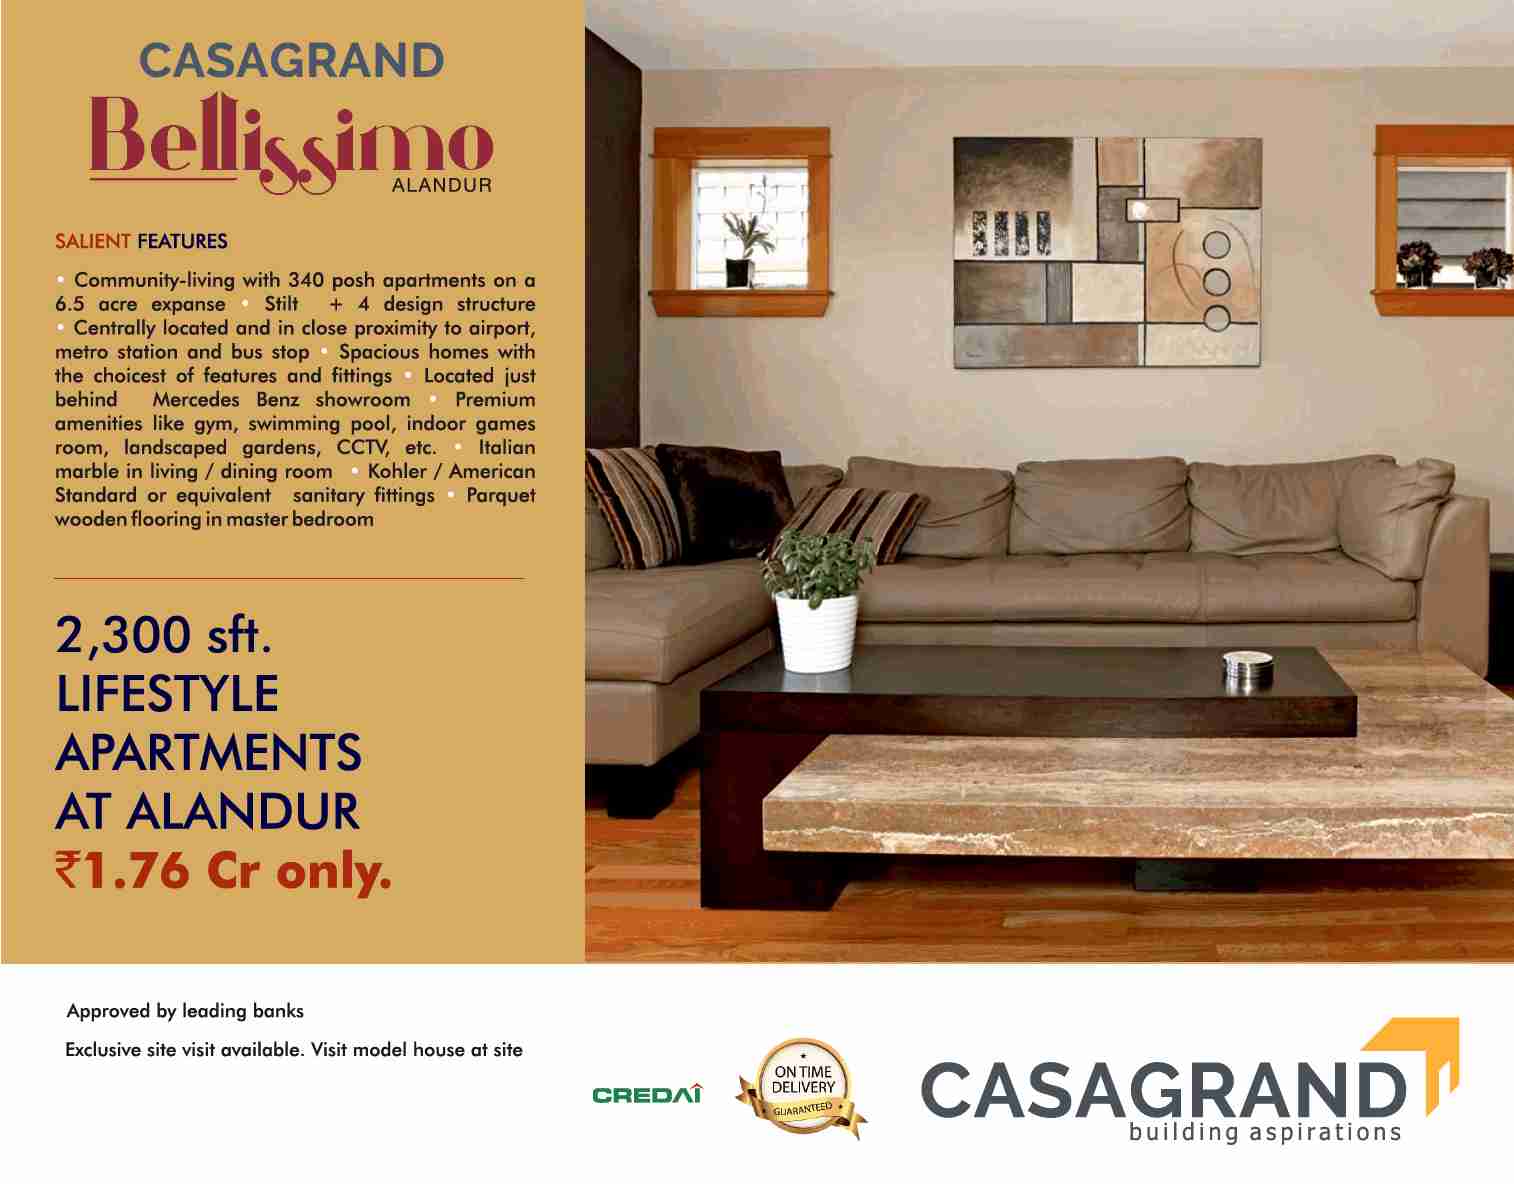 Book lifestyle apartments at Rs. 1.76 cr at Casagrand Bellissimo in Chennai